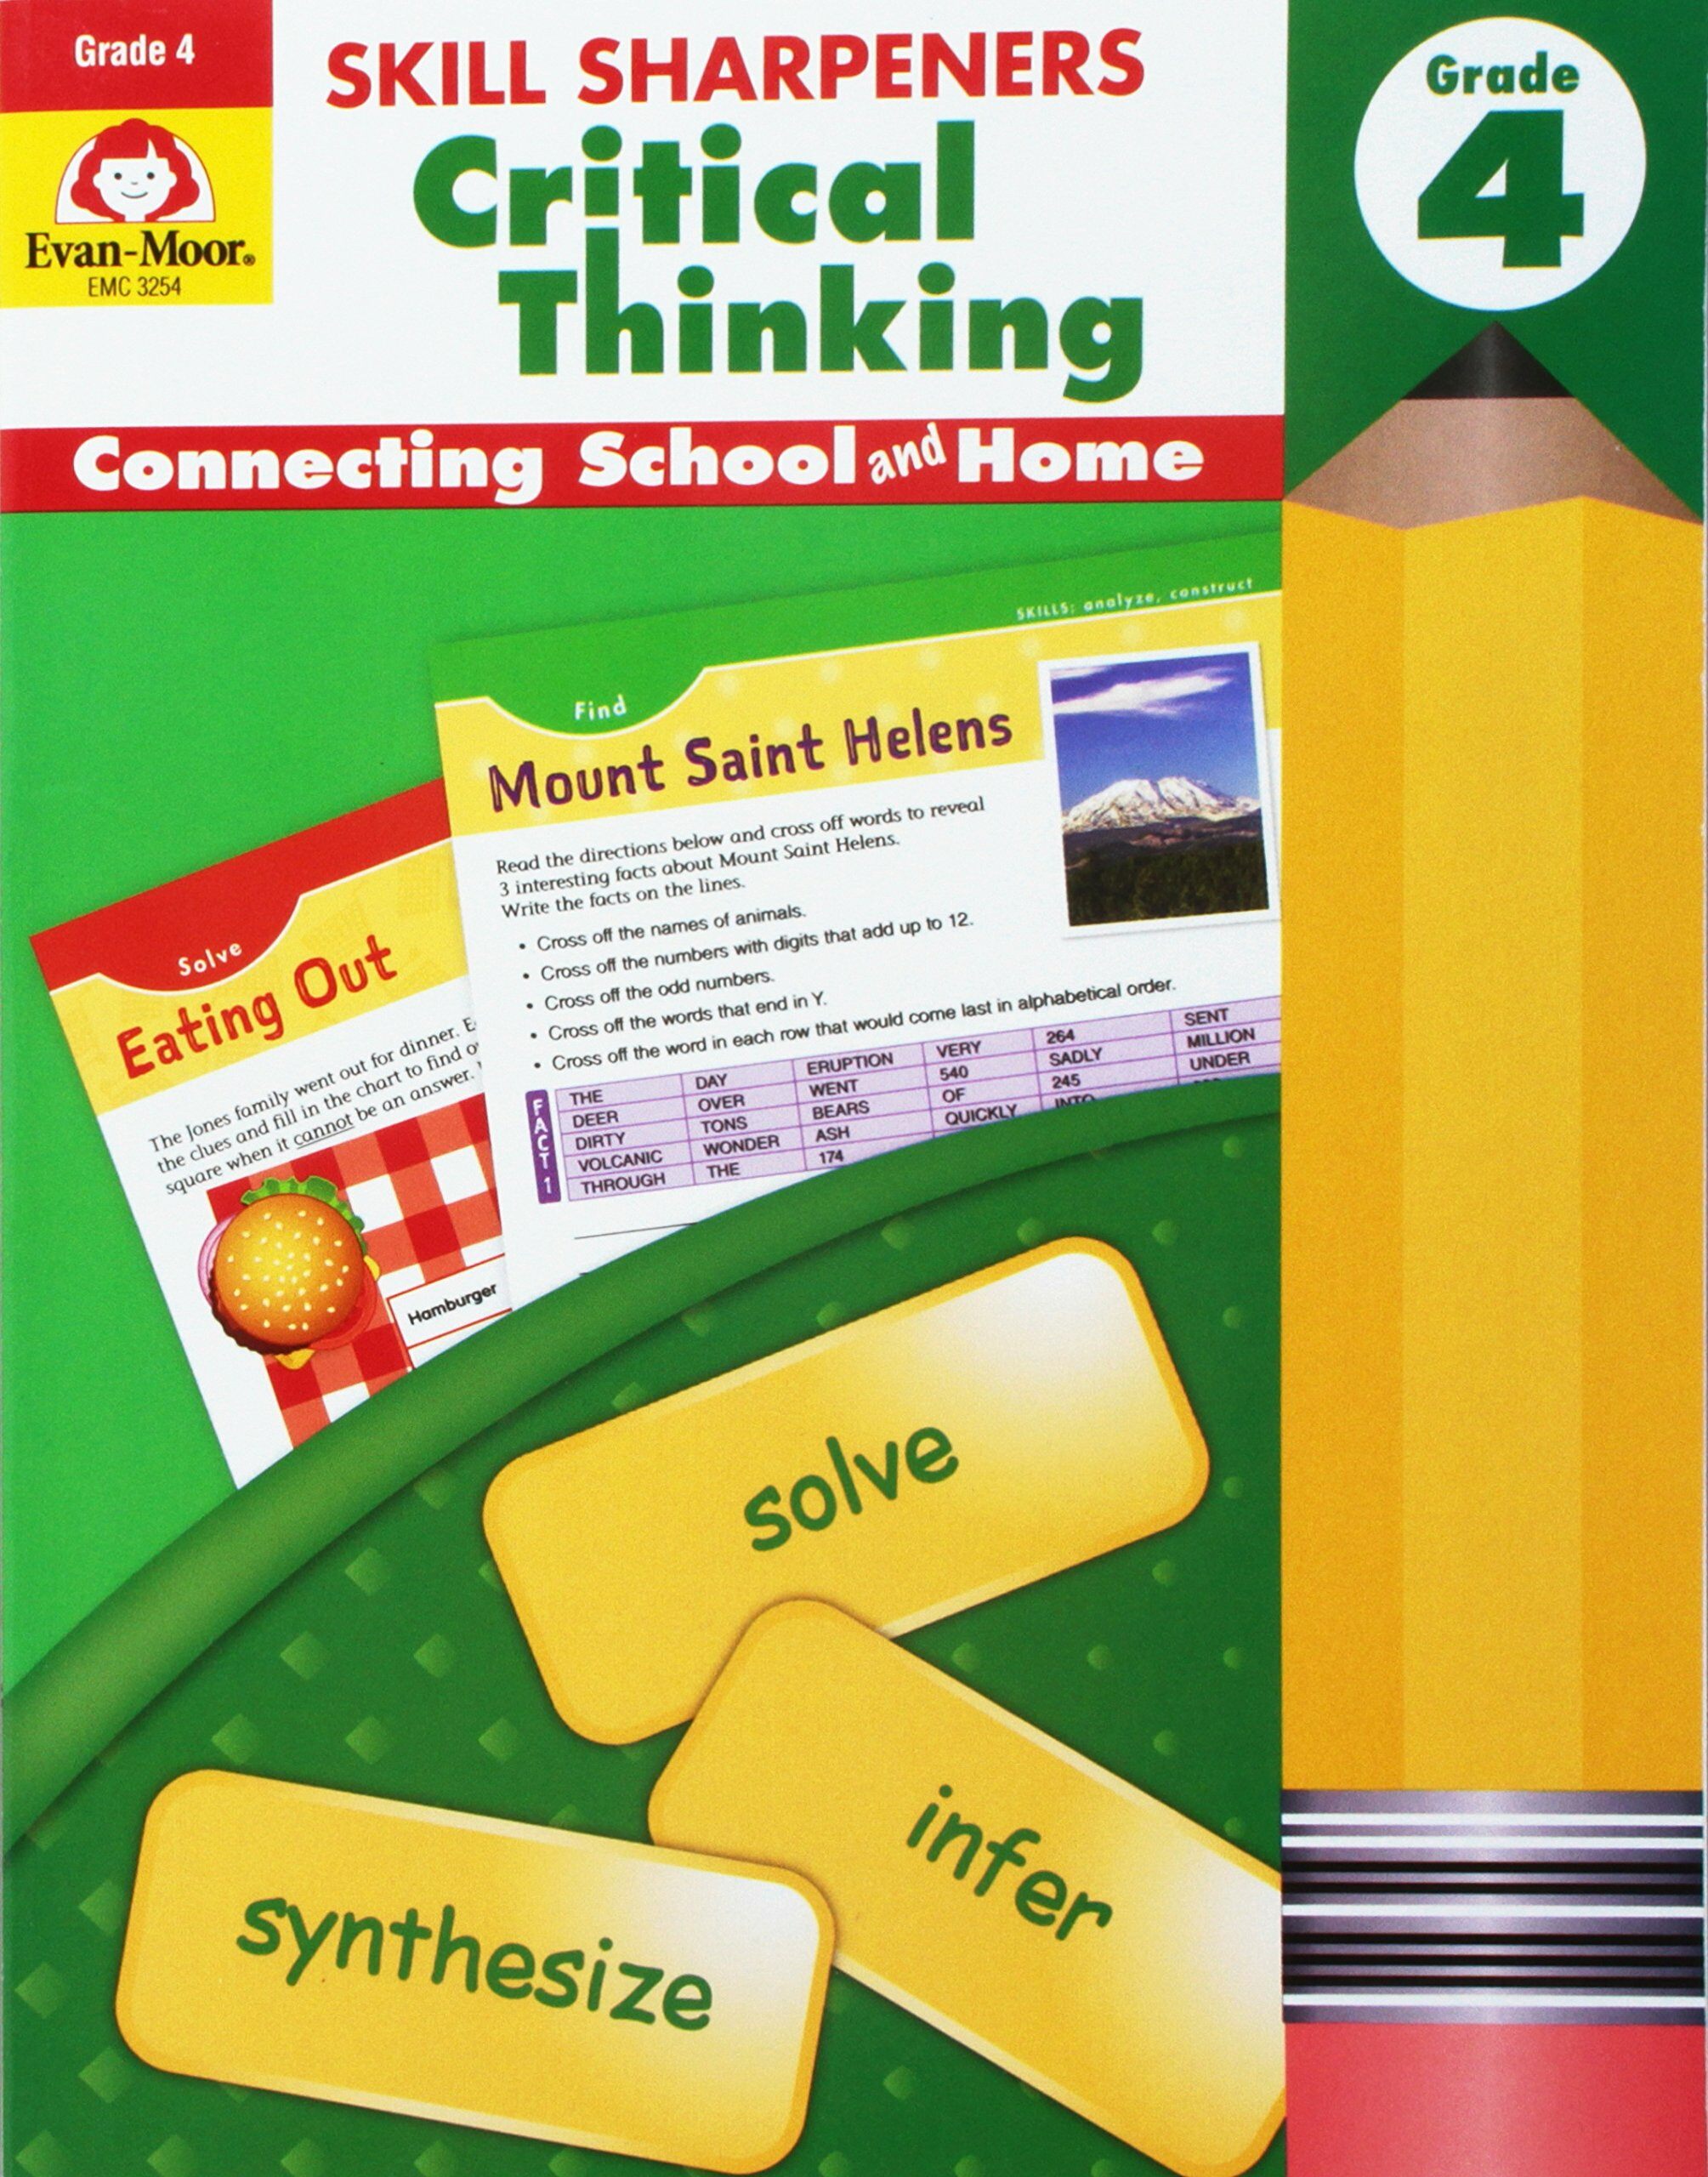 [Evan-Moor] Skill Sharpeners Critical Thinking 4 : Student Book (Paperback)